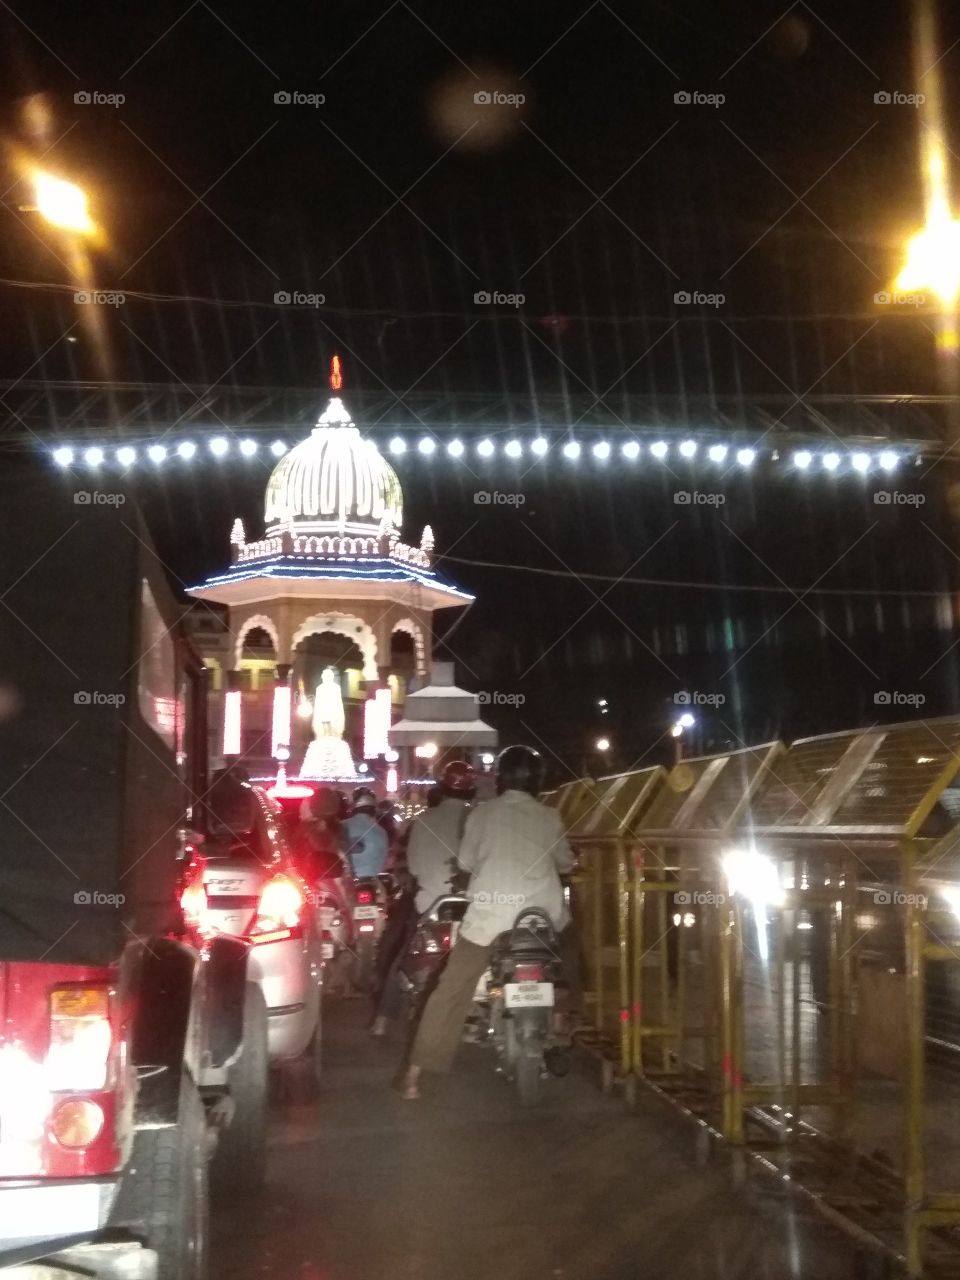 Dussehra festival is a famous festival for Hindus in India celebrates for the win of good over evil. Mysore in southern part of India is famous for this celebration. City will be decorated with different kind of lightings. Took this during Dussehra days in Mysore, Karnataka, India.